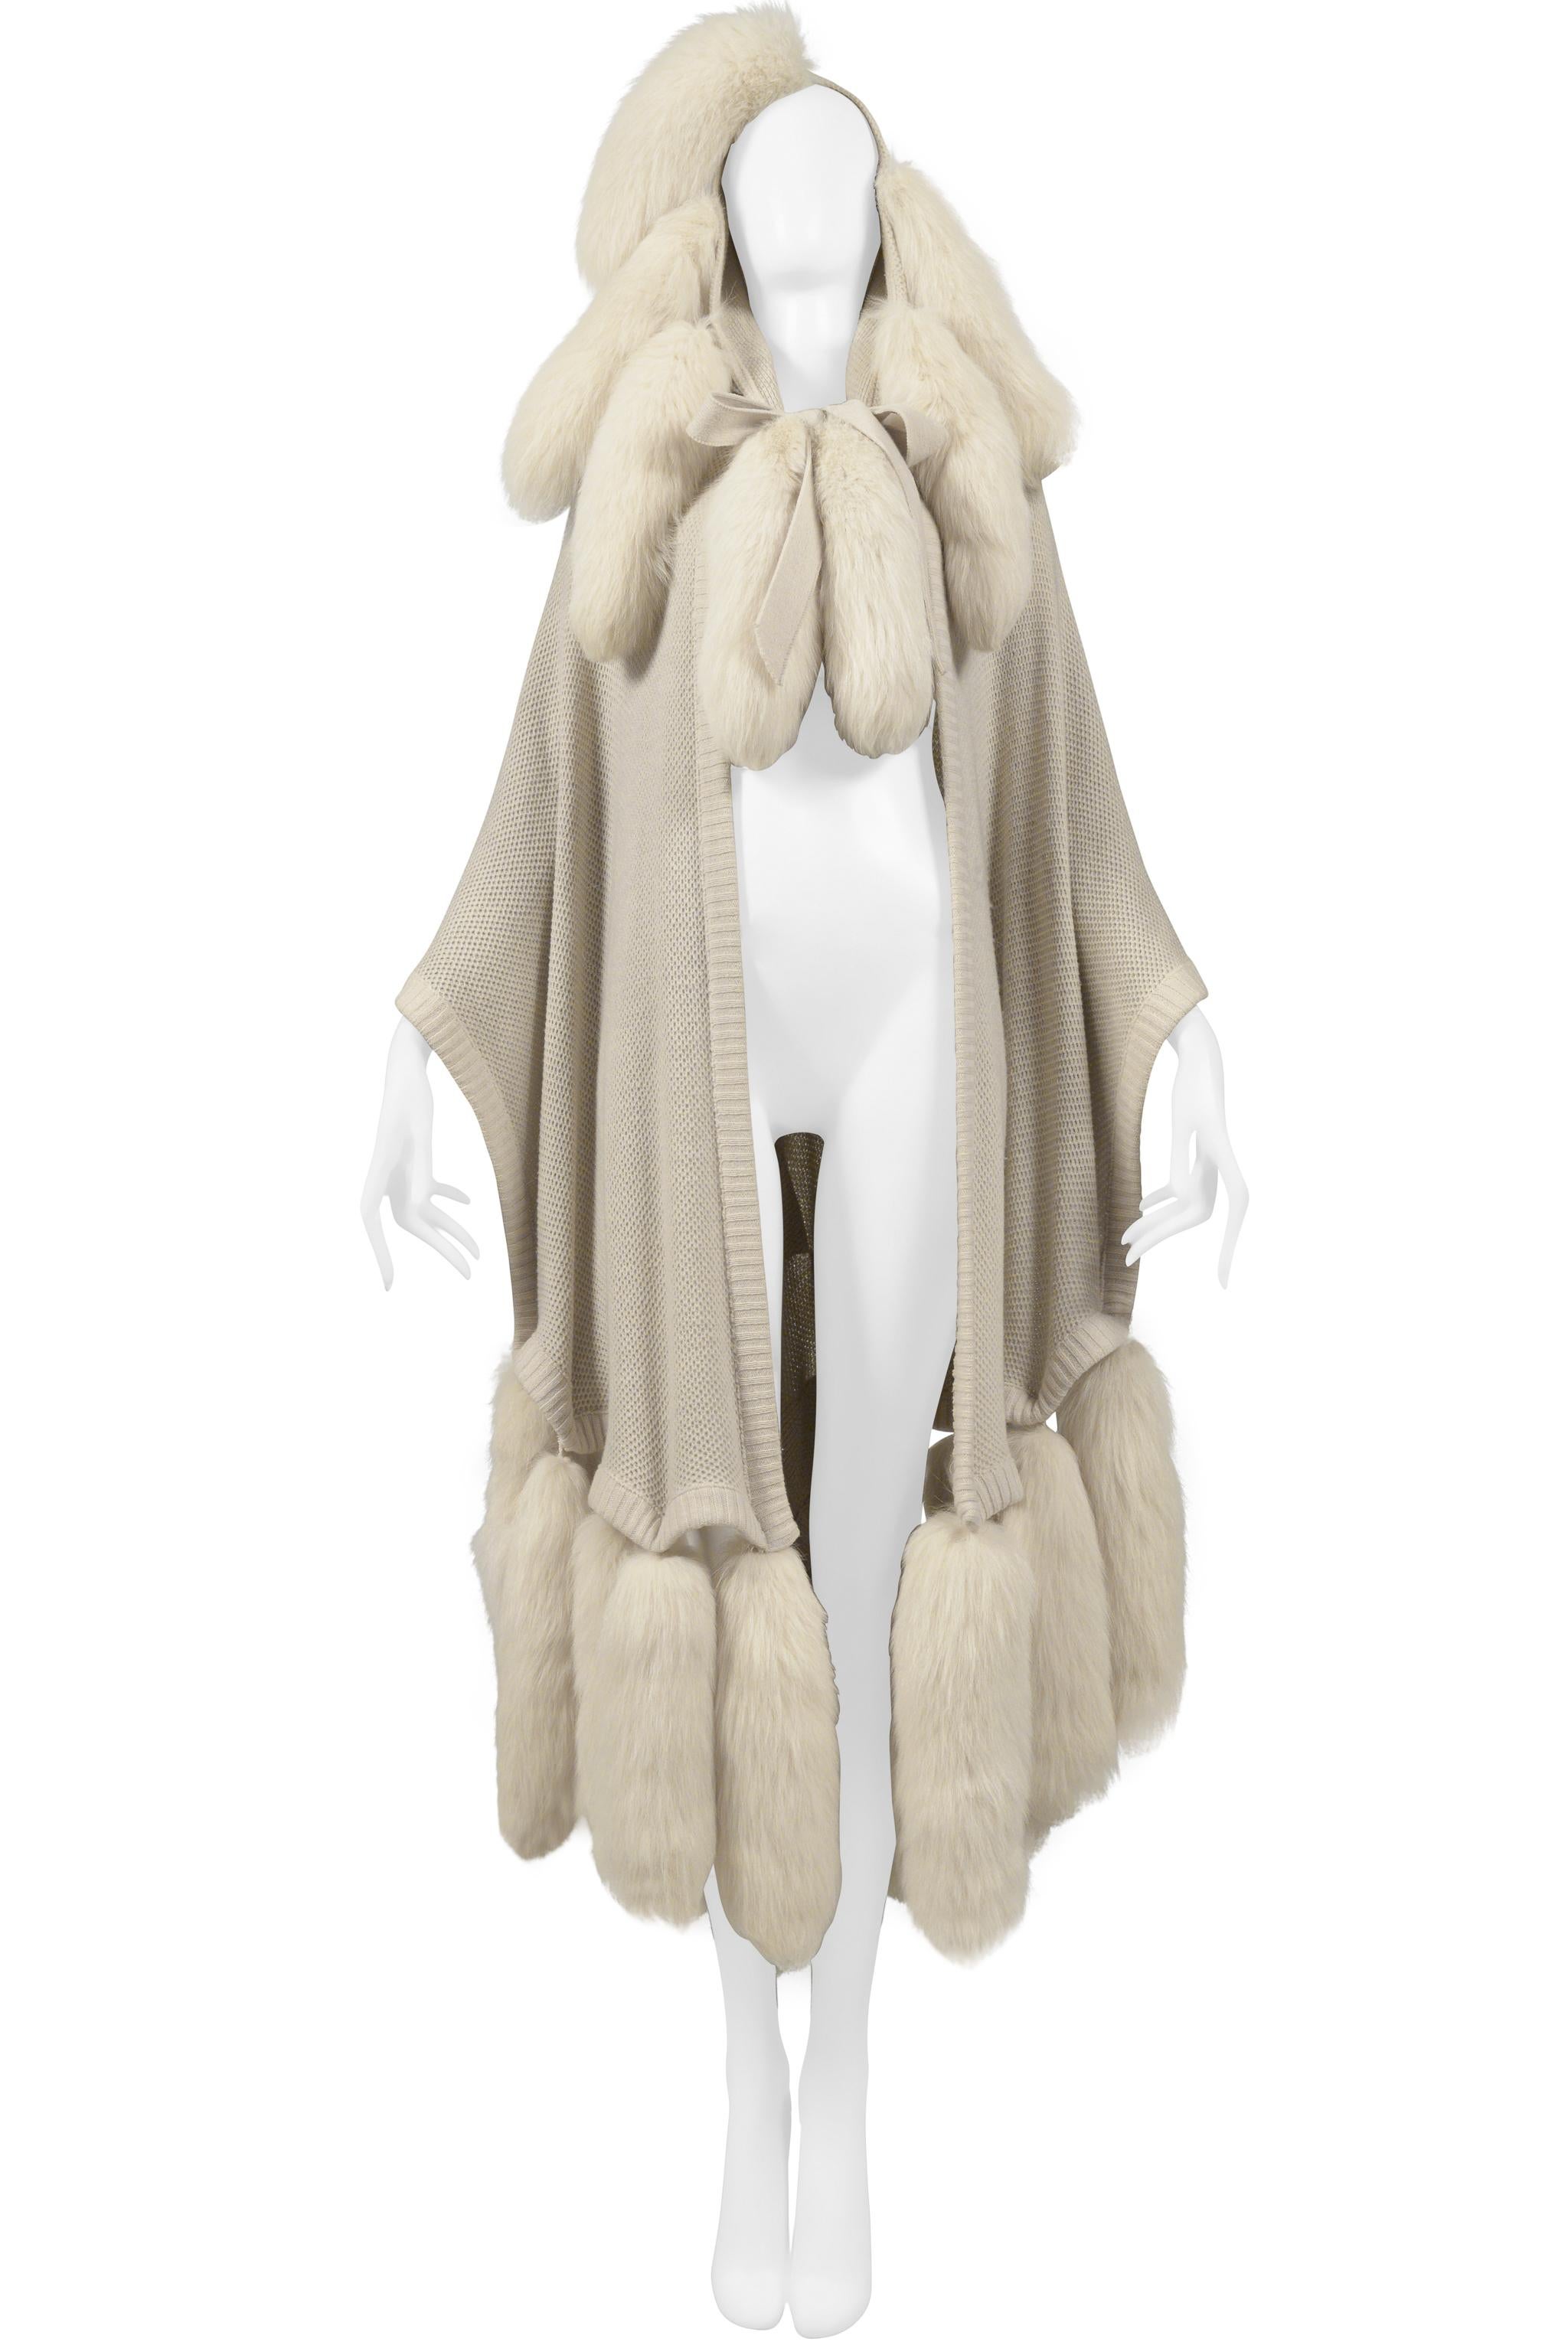 Resurrection Vintage is excited to offer a vintage Alimia Paris off-white fur cape featuring fur tails on hood and bottom of cape, thick drawstrings, and checkered leather patch detailing at back.
* Alimia Paris
* One Size
* No Fabric Label. Feels